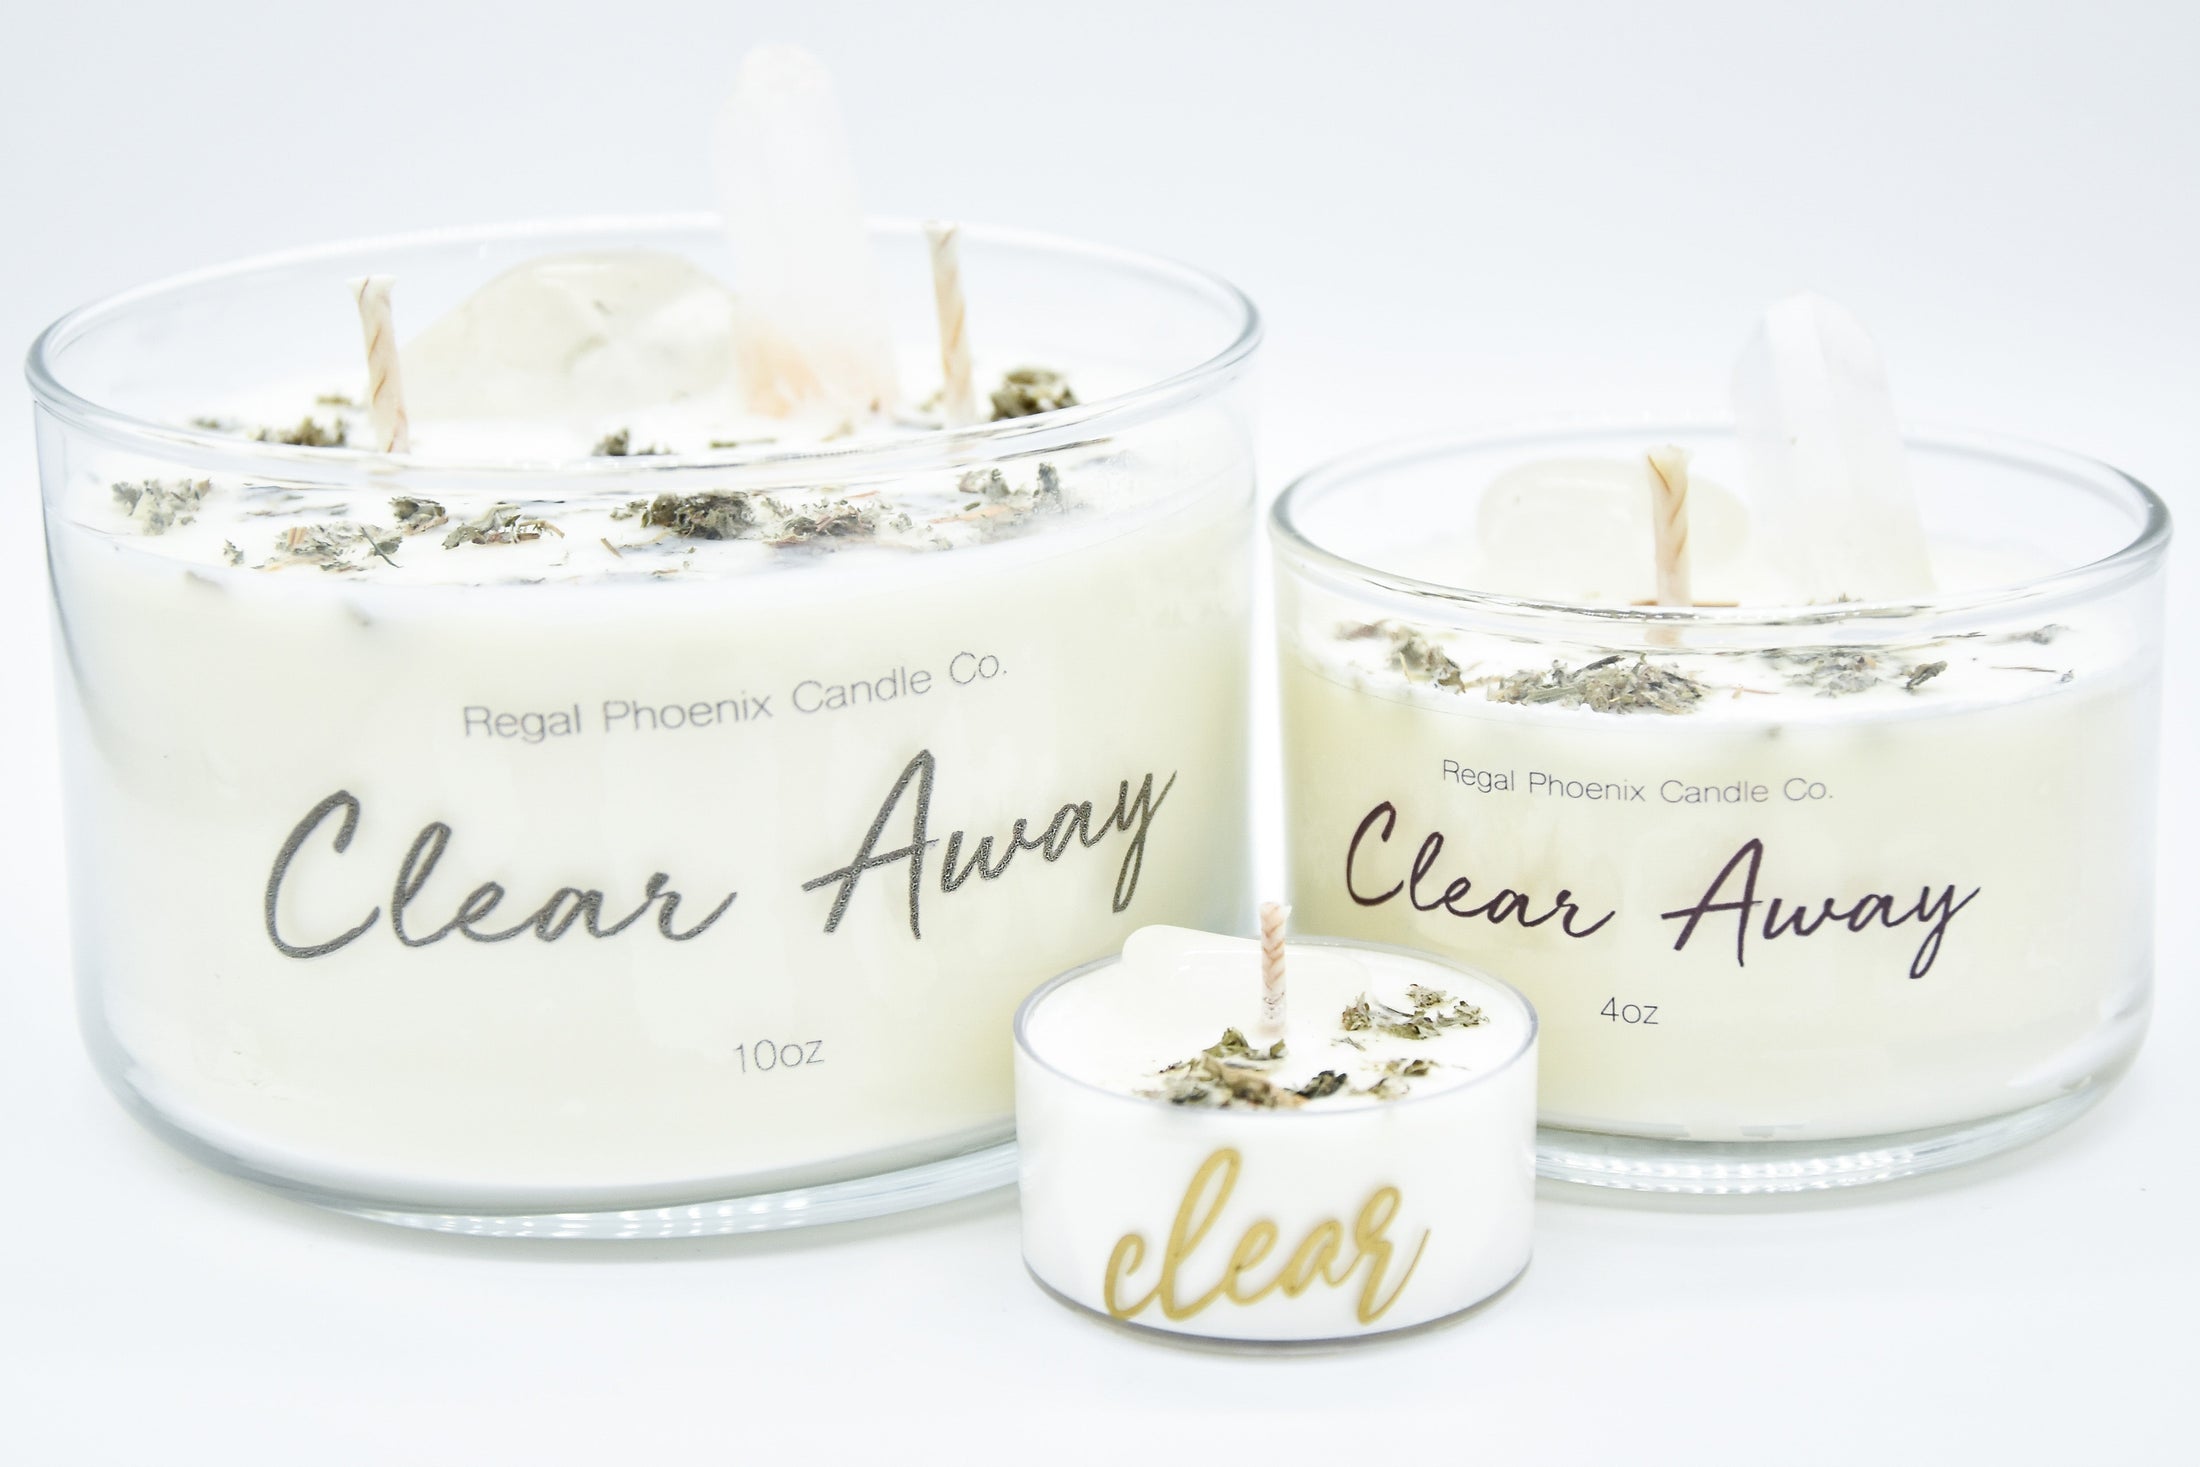 "CleanseHer" Crystal Infused Soy Candle